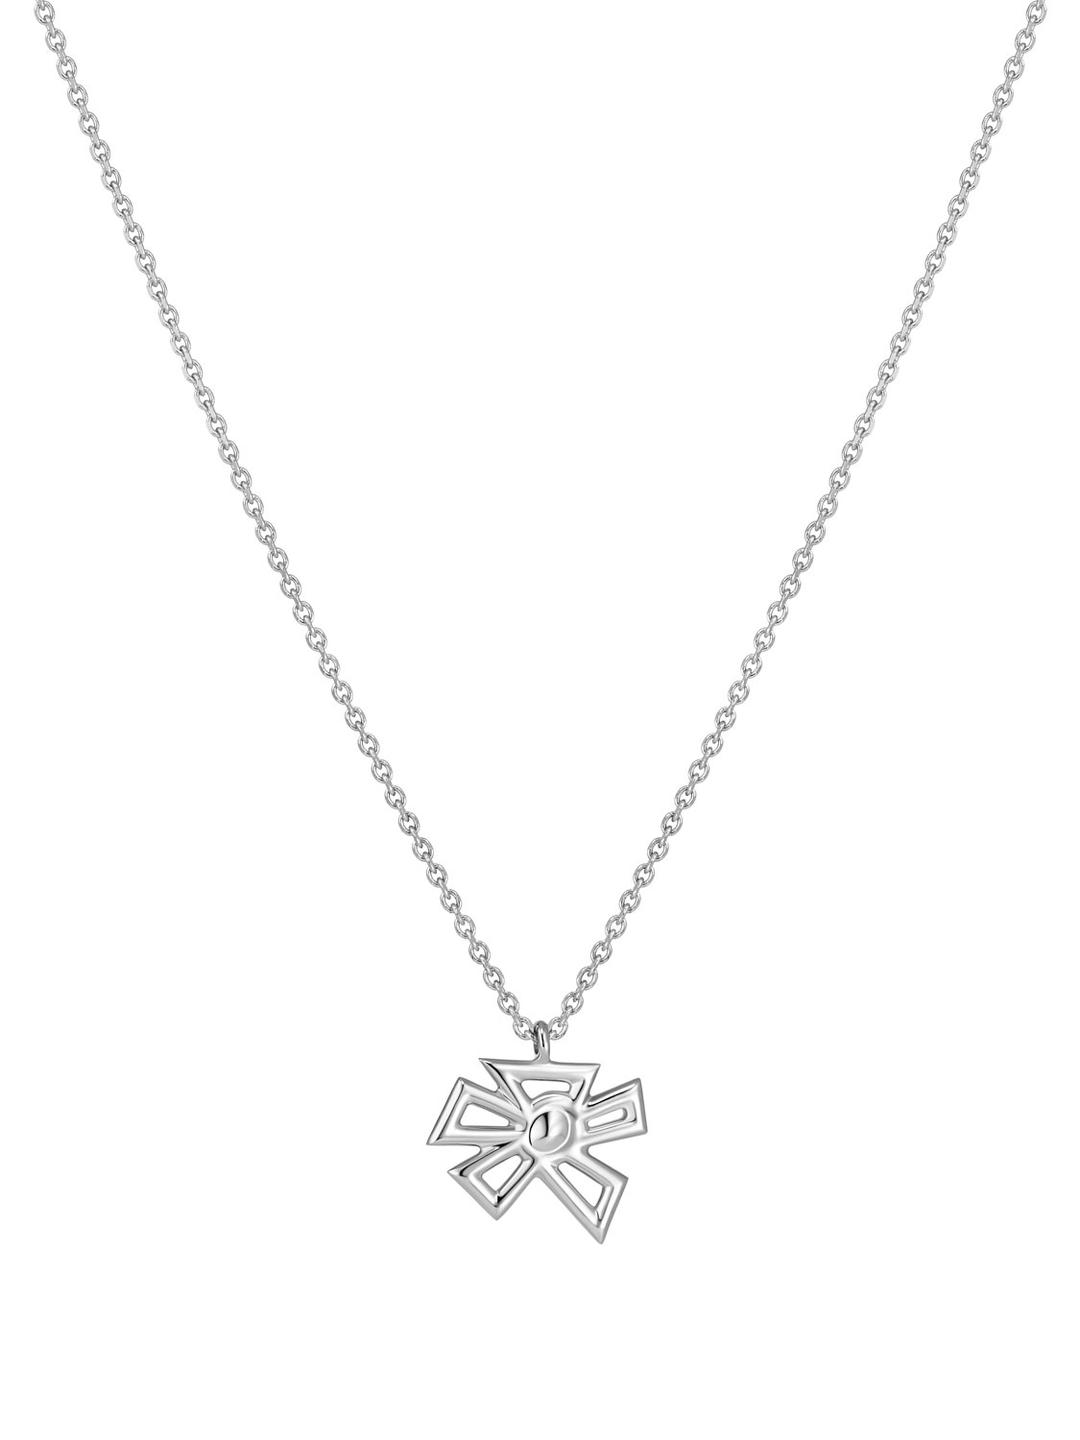 Baret Necklace In White Gold